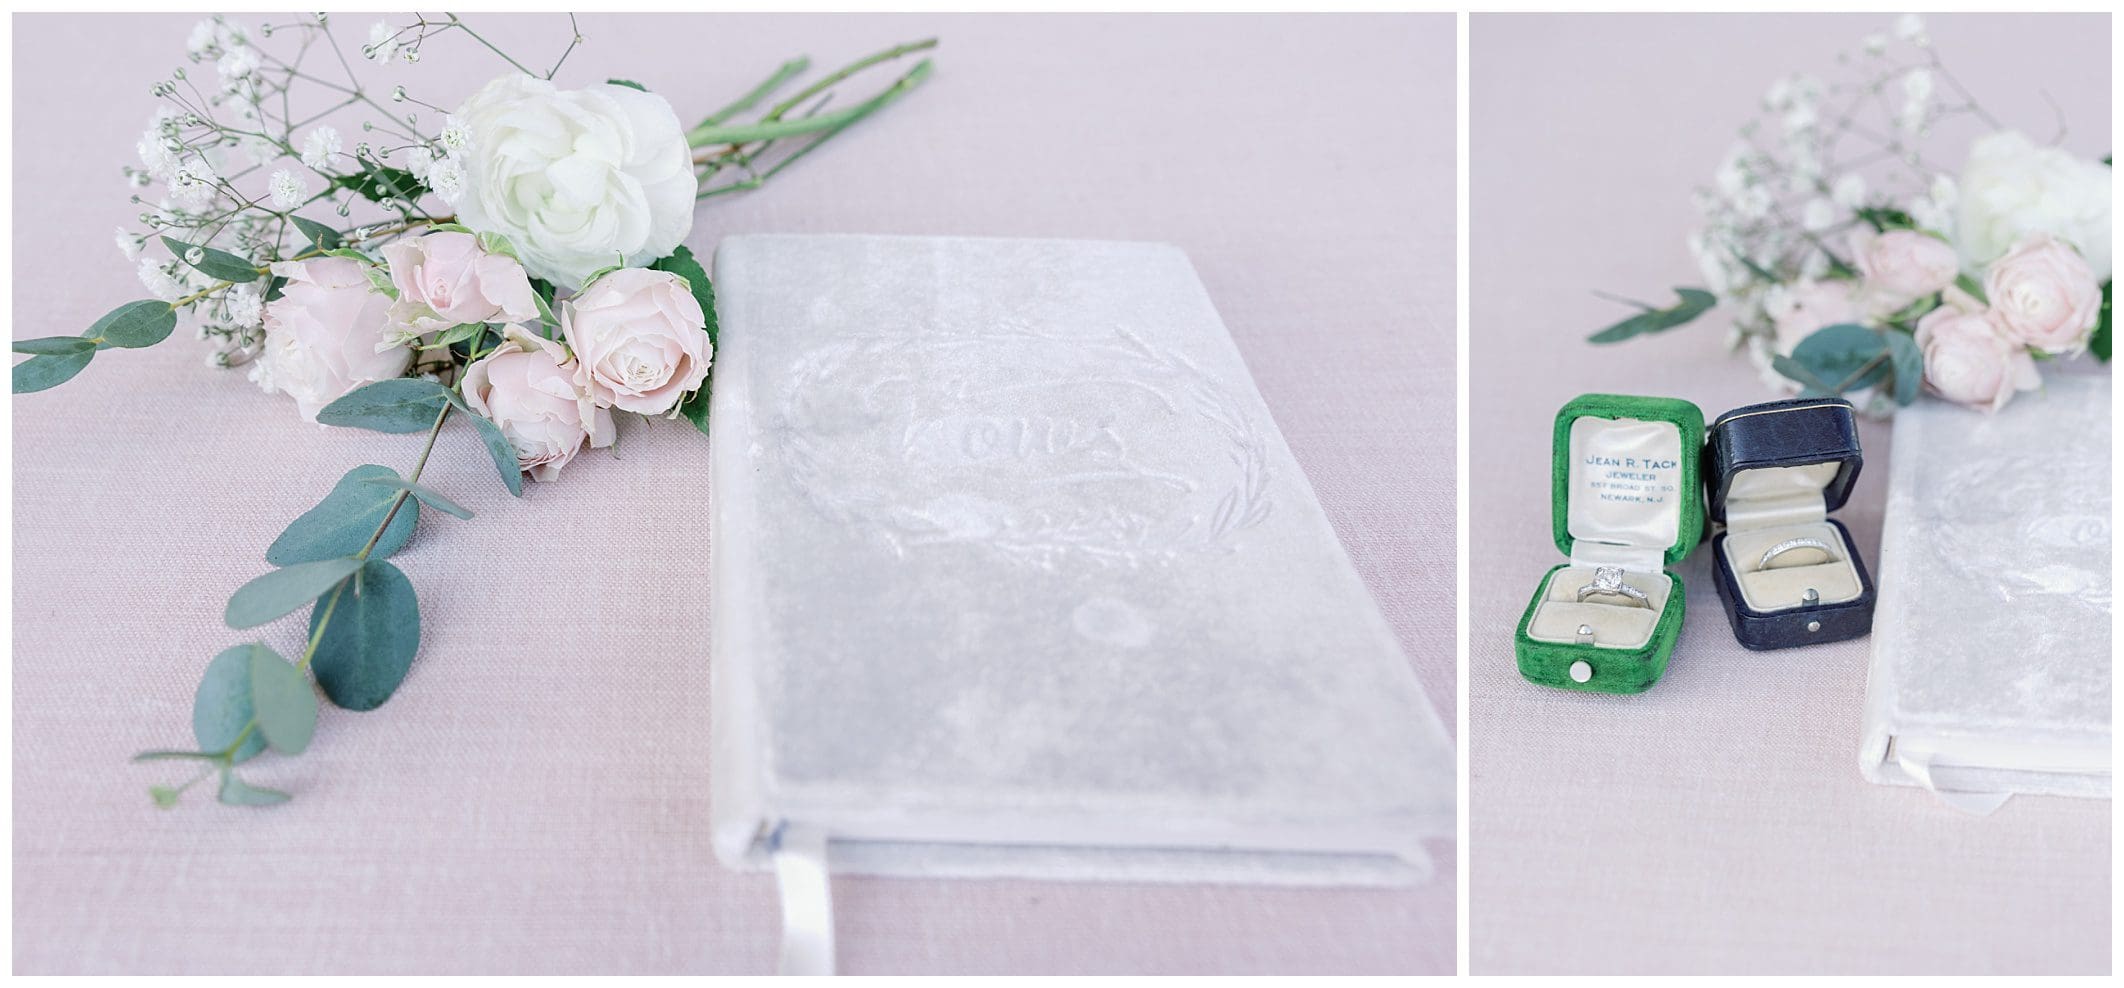 A wedding book with a wedding ring and flowers.